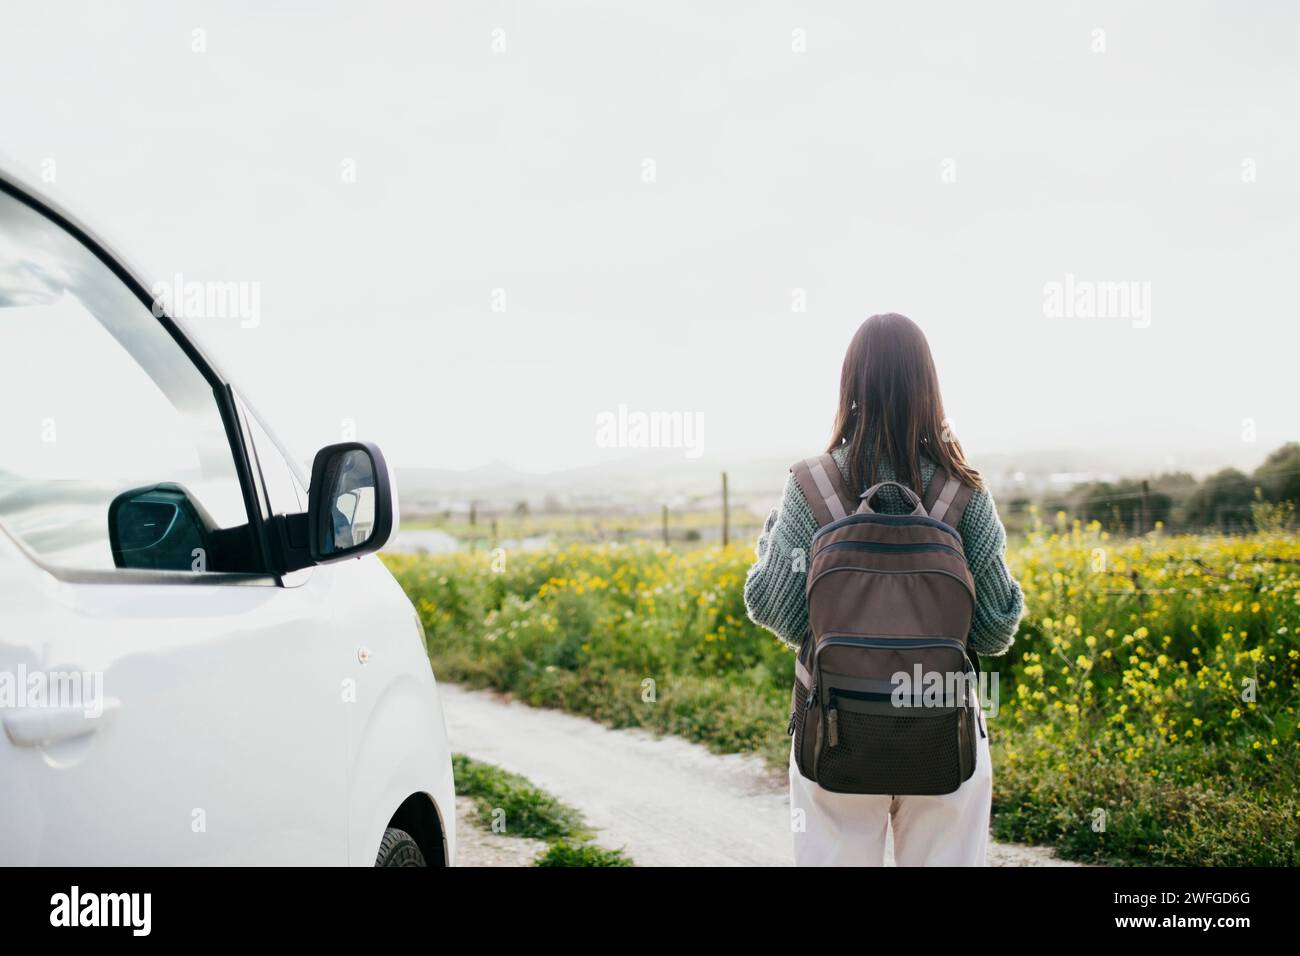 Rear view of woman with backpack looking at field standing by van against sky Stock Photo